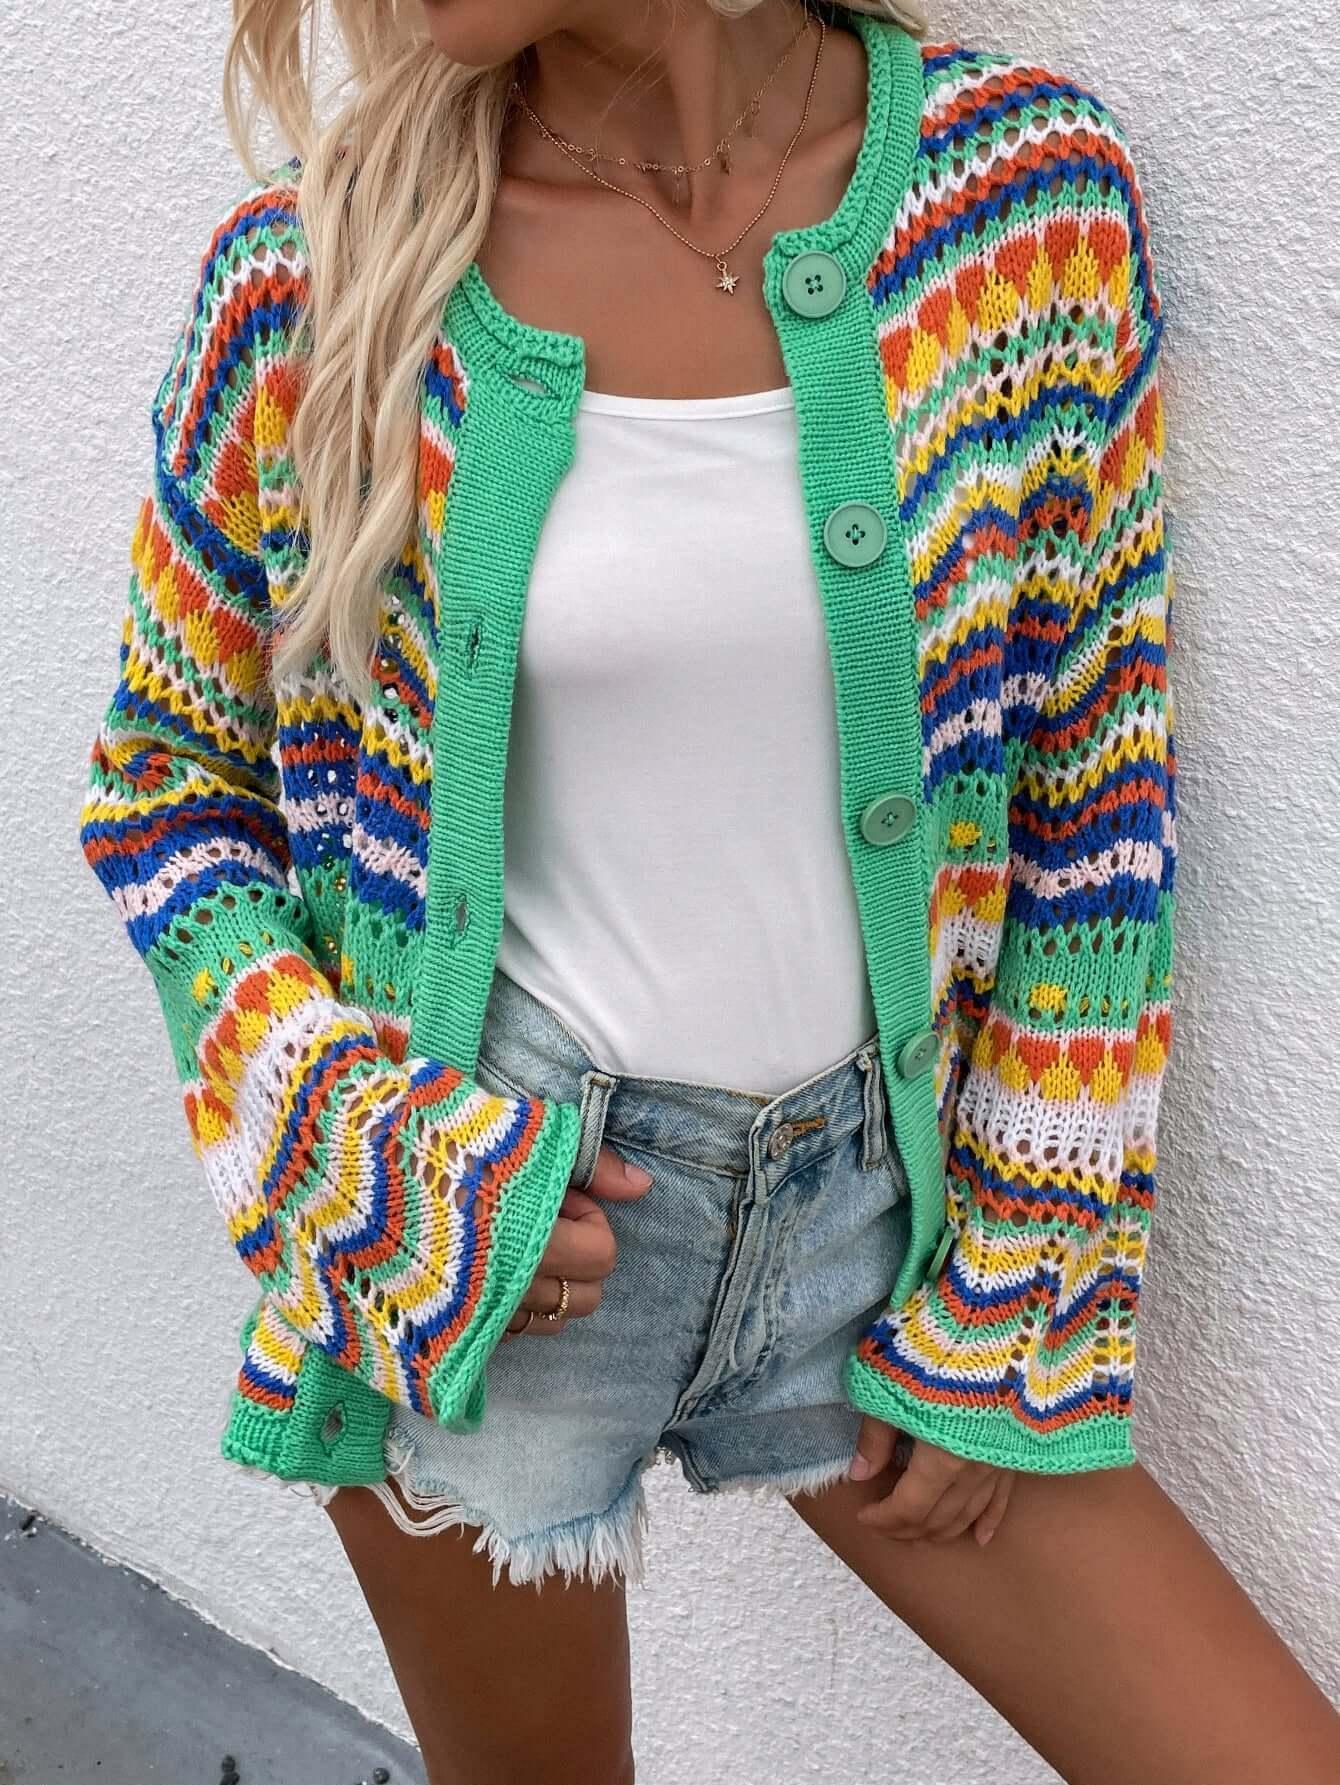 Chevron Cardigan - green striped cardigan hip length with pockets and button Front. #Firefly Lane Boutique1